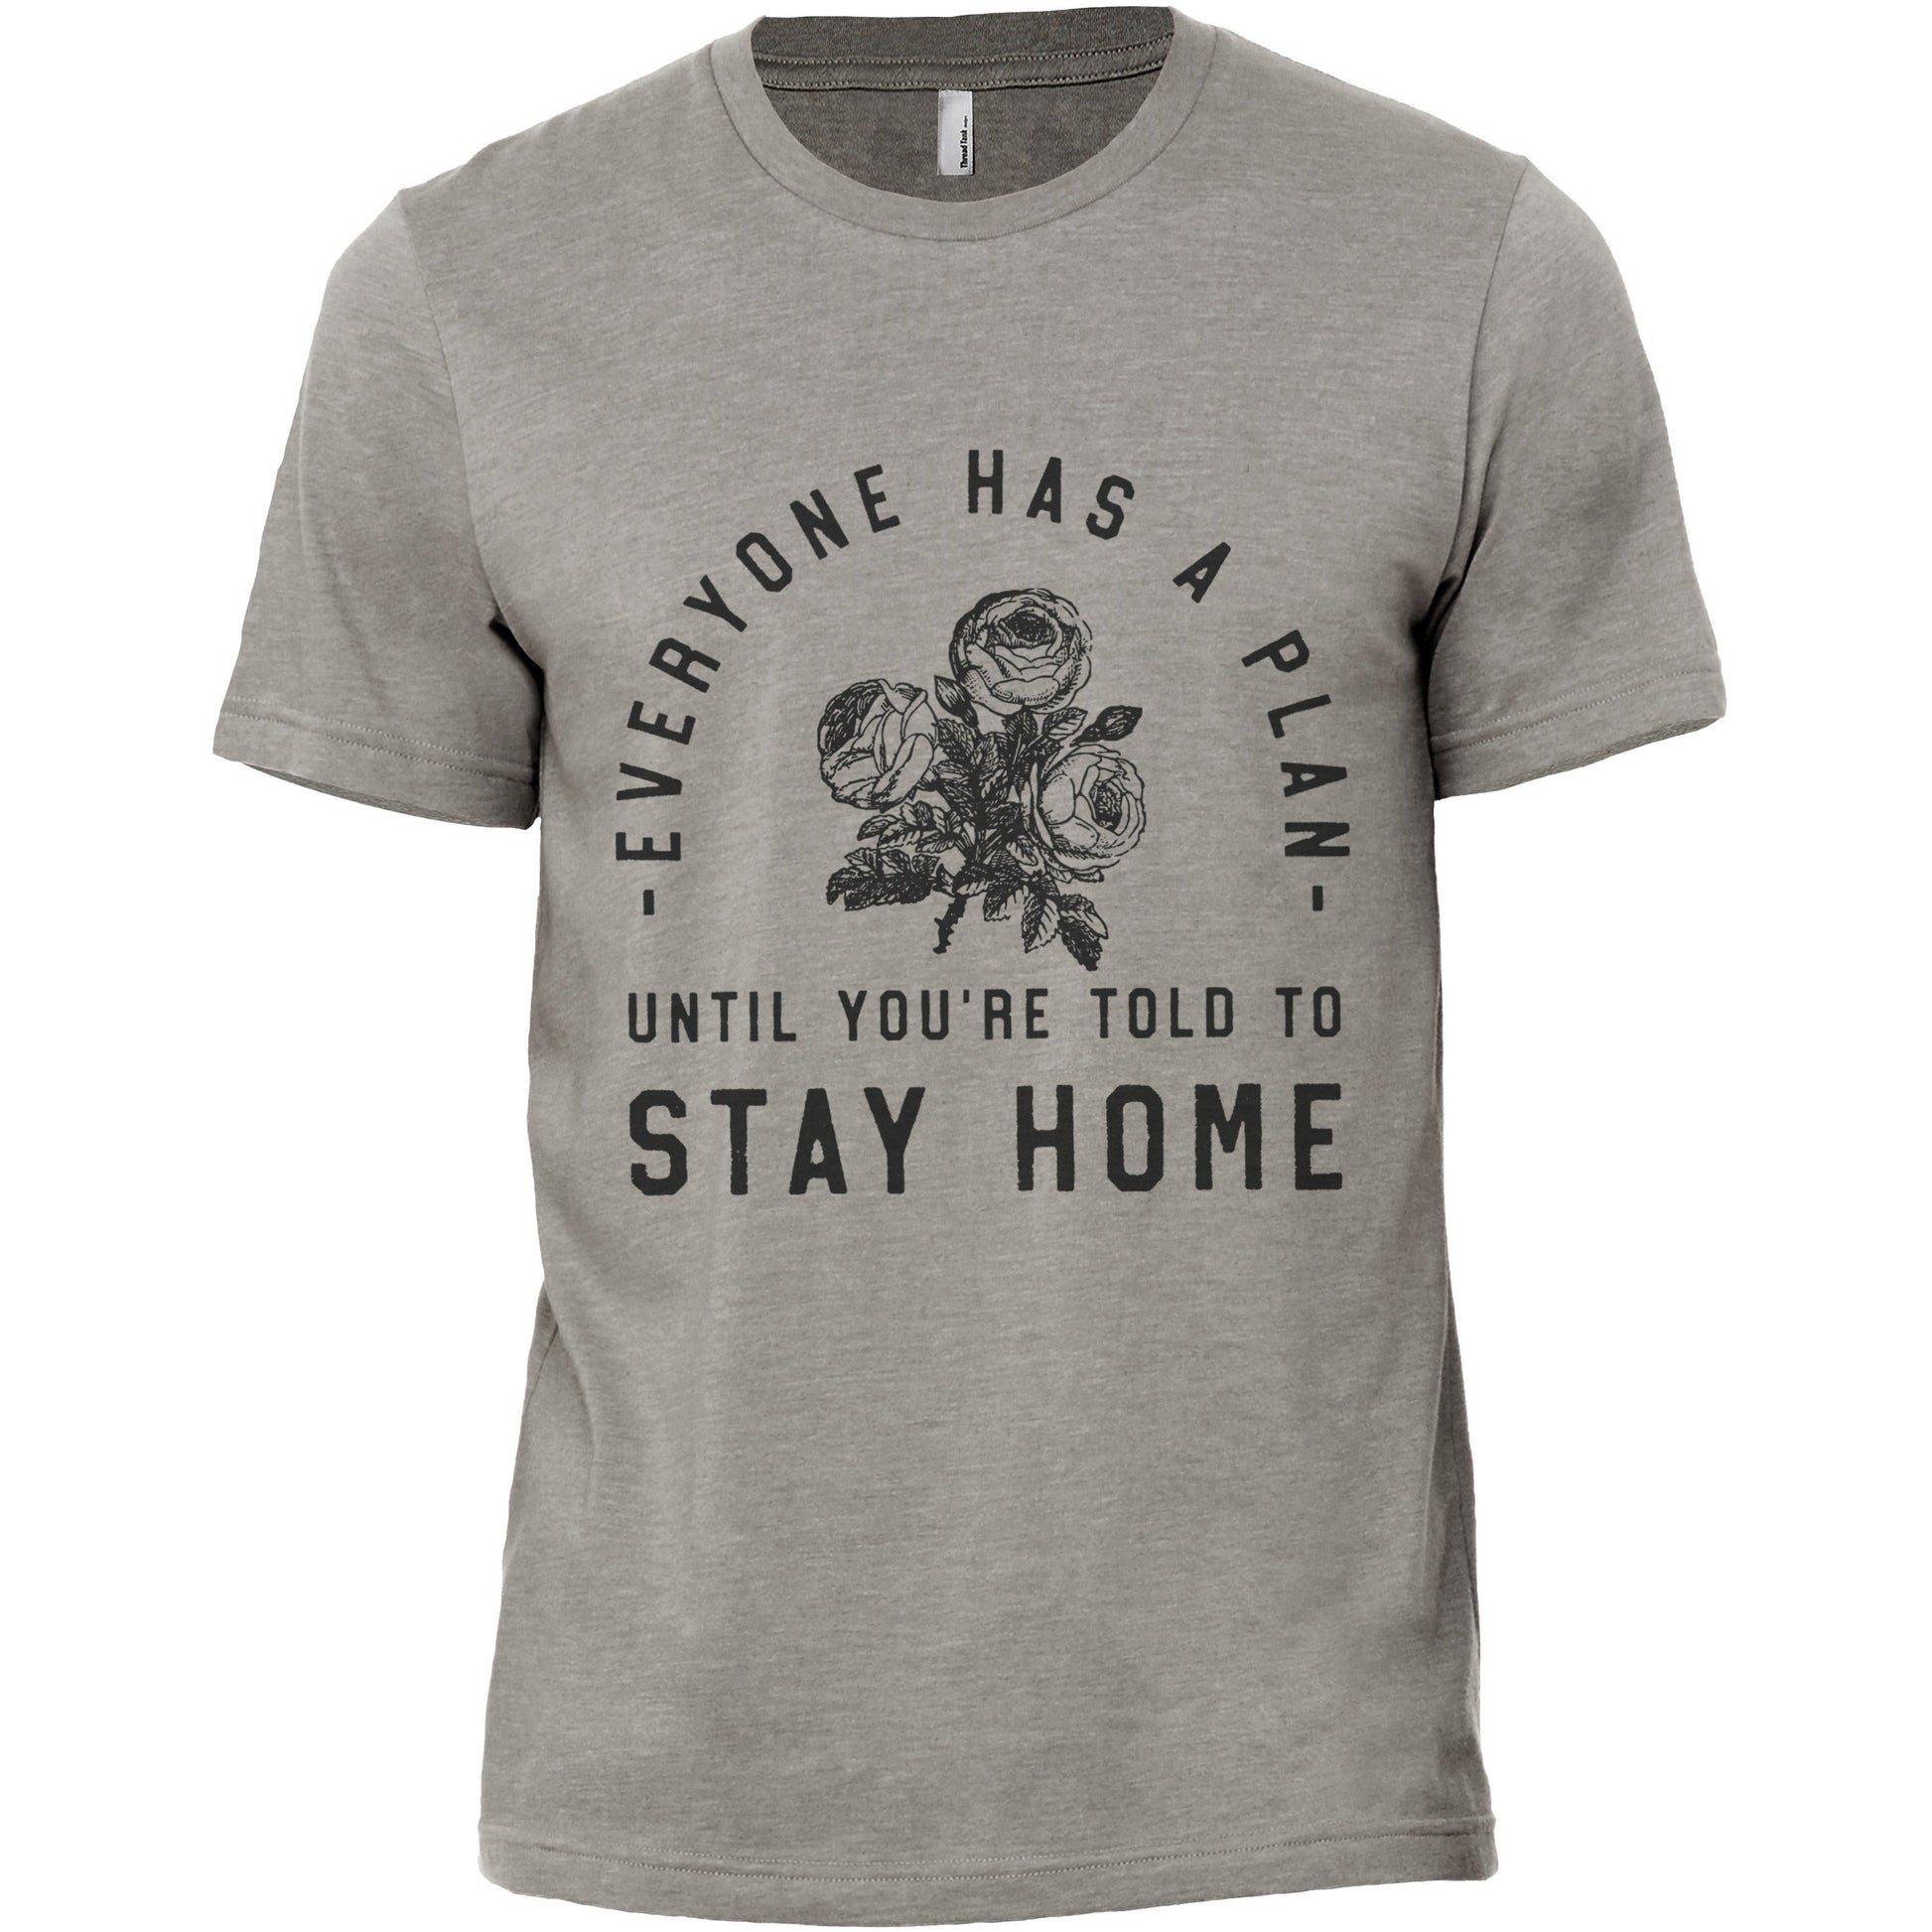 Until You're Told To Stay Home - Stories You Can Wear